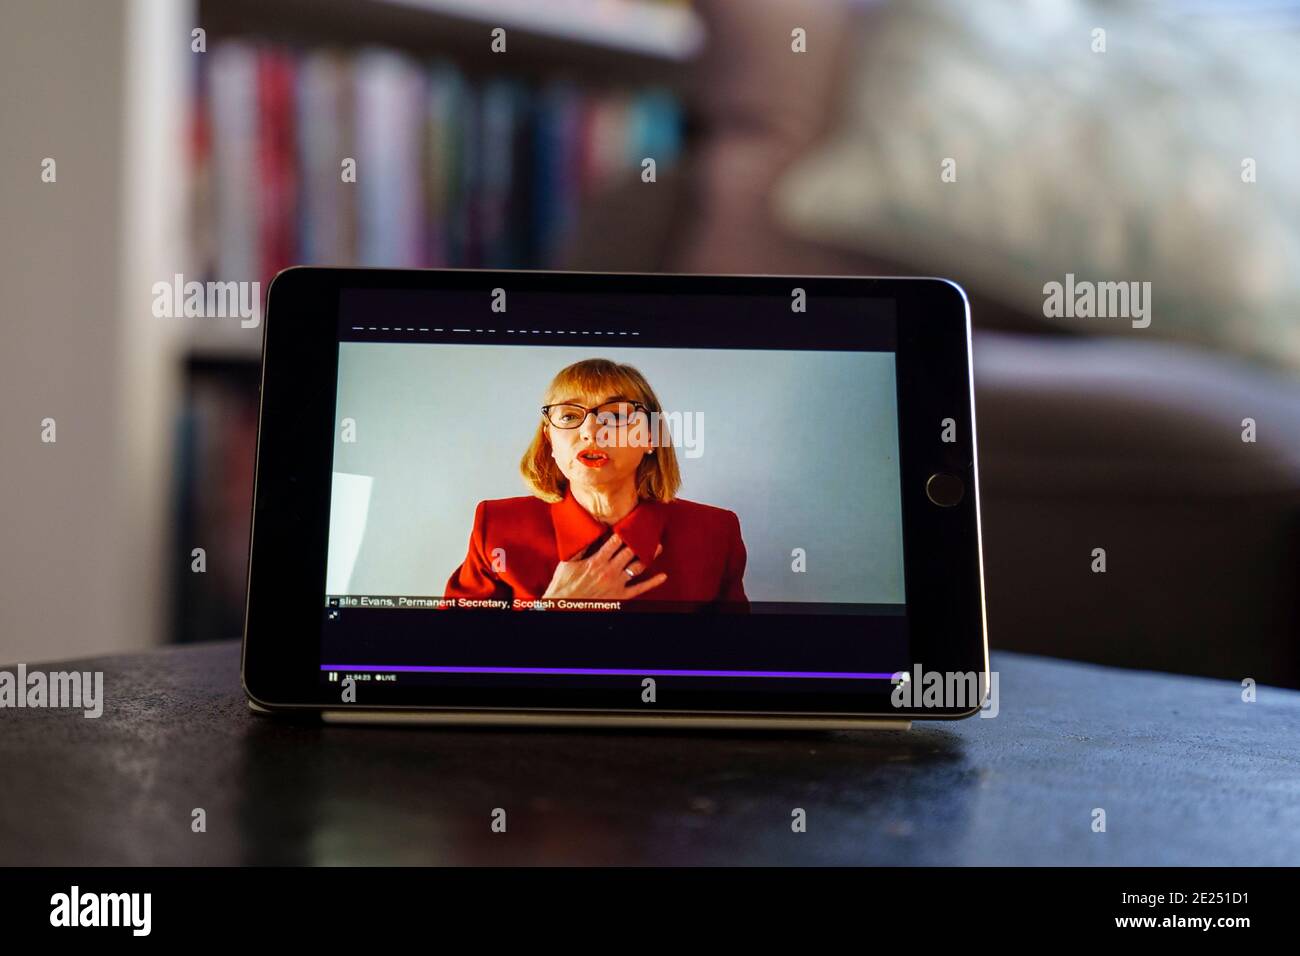 Edinburgh, Scotland, UK. 12 January 2021. Image of live streaming of Permanent Secretary of Scottish Government Leslie Evans giving virtual evidence to the Committee on the Scottish Government Handling of Harassment Complaints in Edinburgh. The committee was held virtually today because of Covid-19 pandemic.  Iain Masterton/Alamy Live News Stock Photo